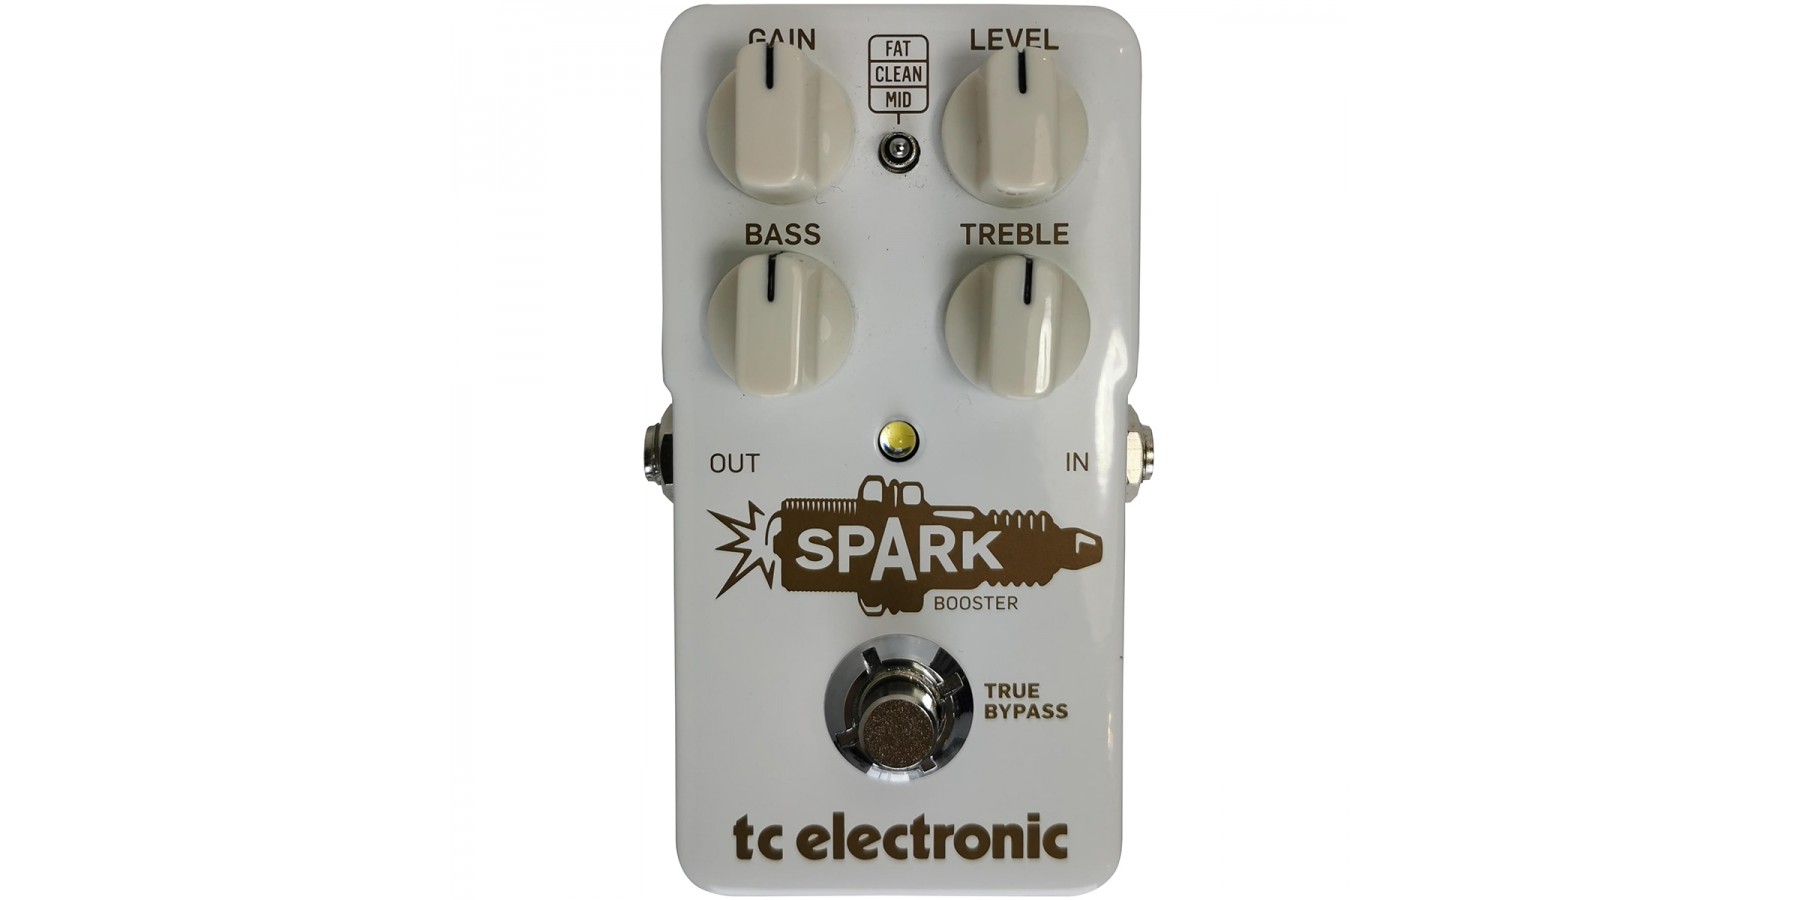 tcelectronic sparkminibooster ギターエフェクター - ギター